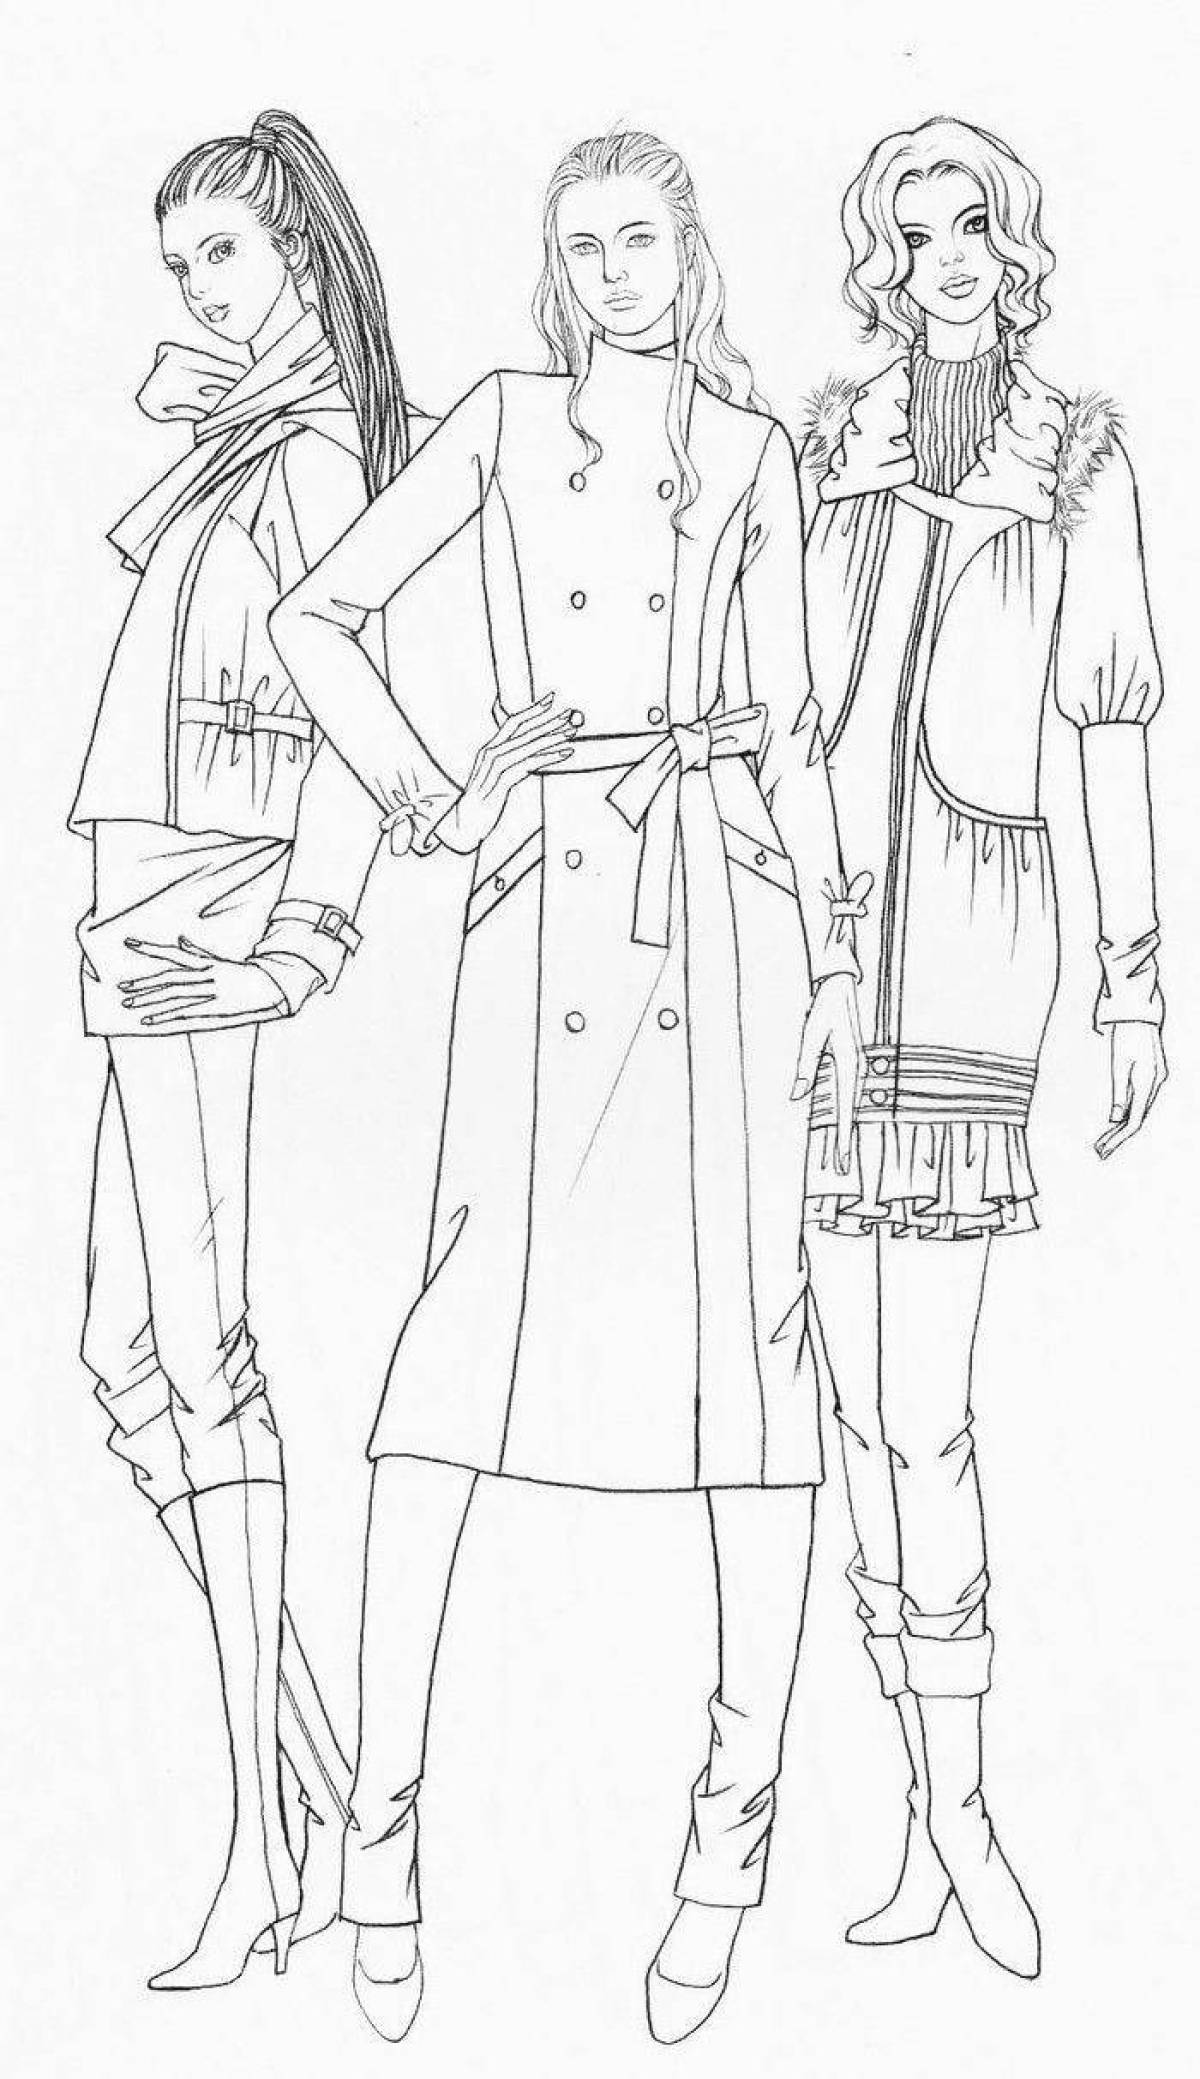 Coloring page with funny clothes